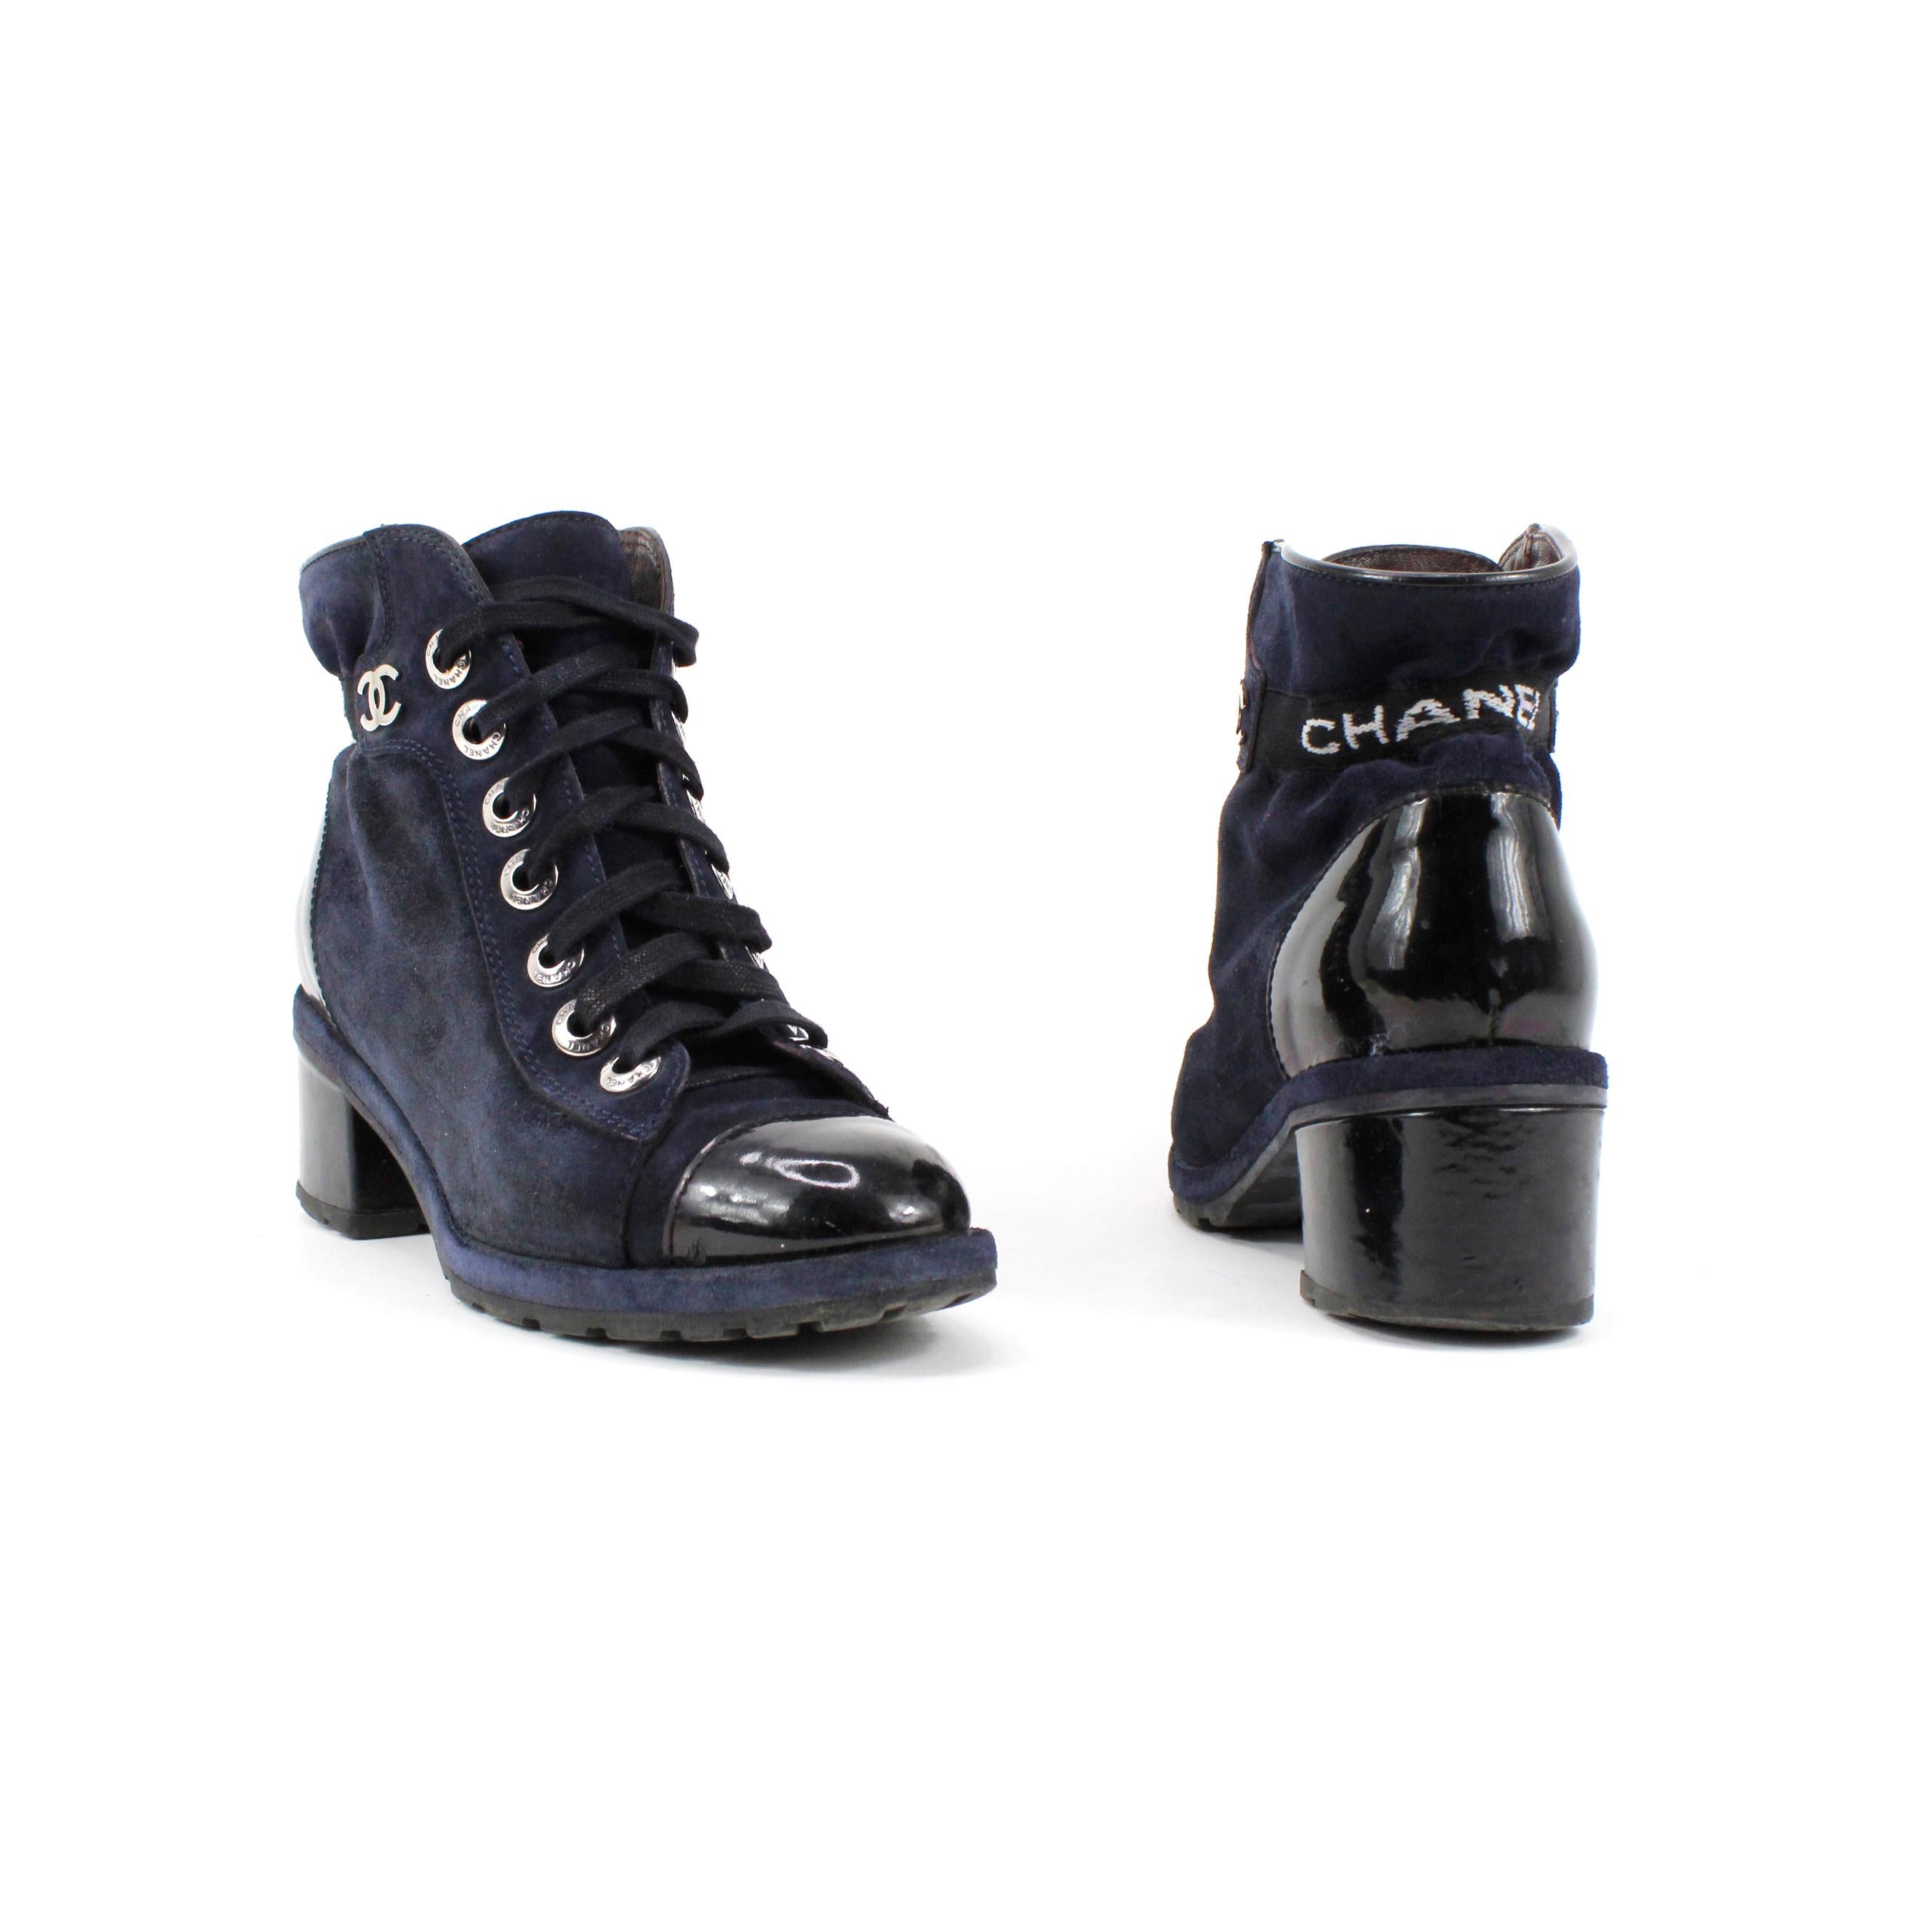 Women's Chanel Boots For Sale